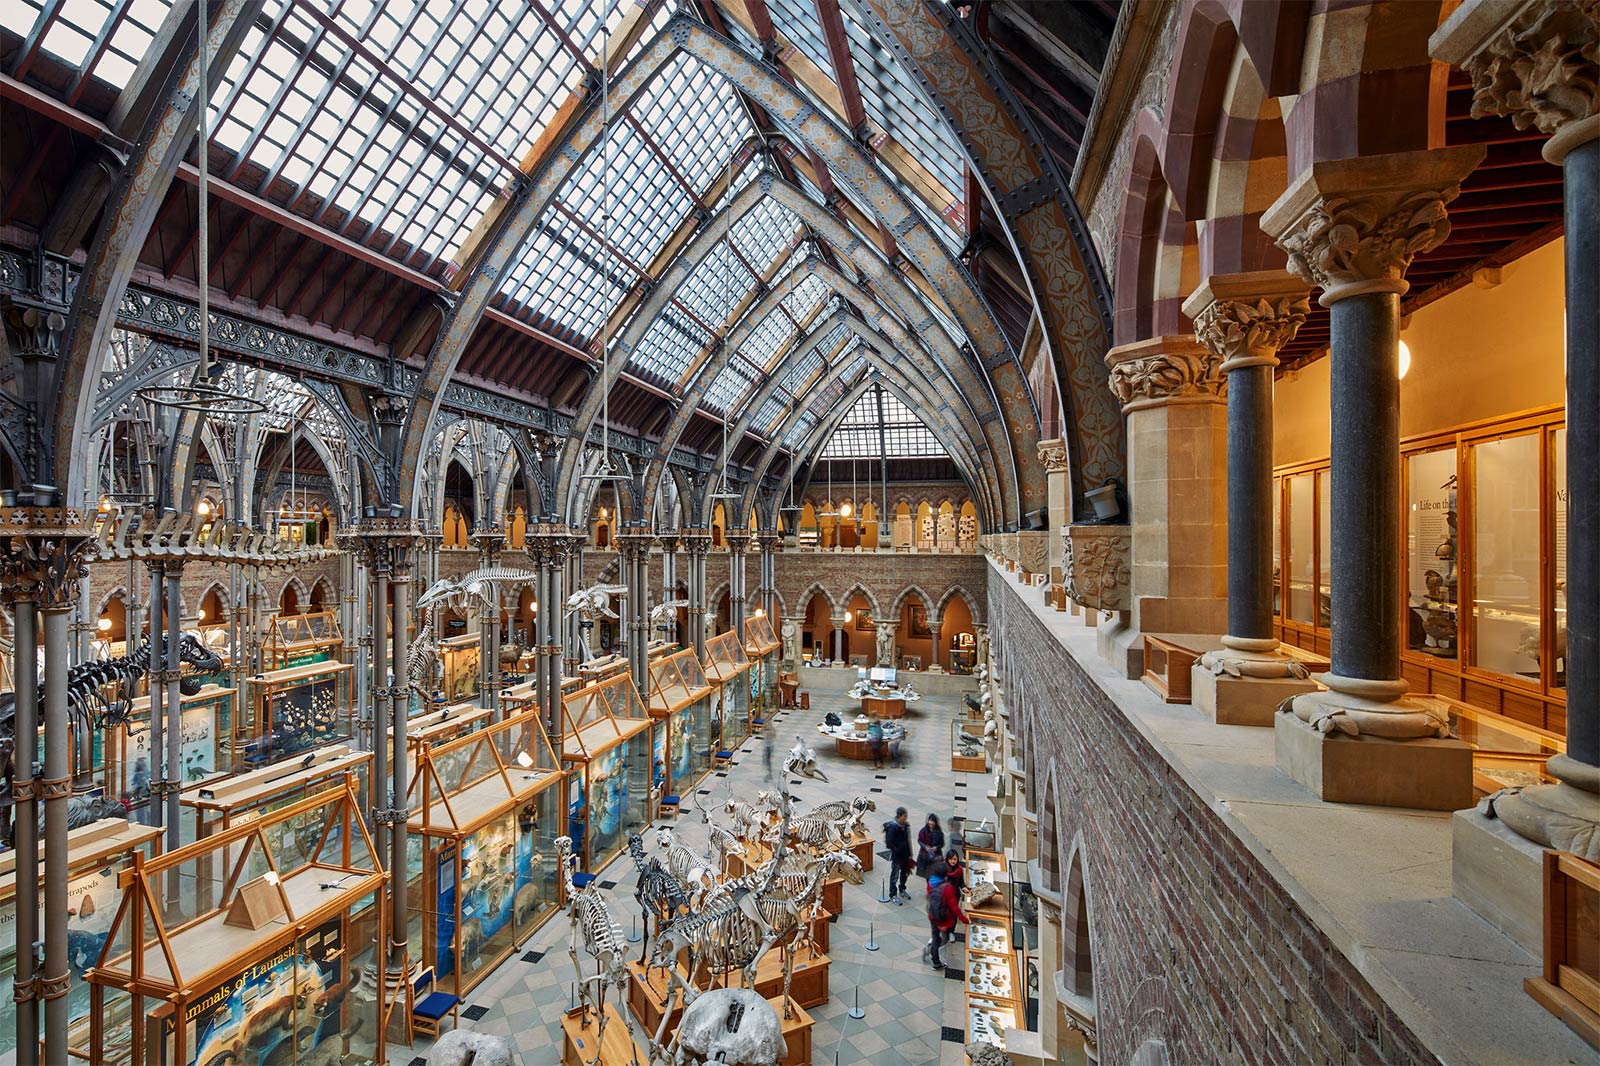 The interior of the Oxford University Museum of Natural History, designed by Thomas Newenham Deane and Benjamin Woodward and built between 1855 and 1860.